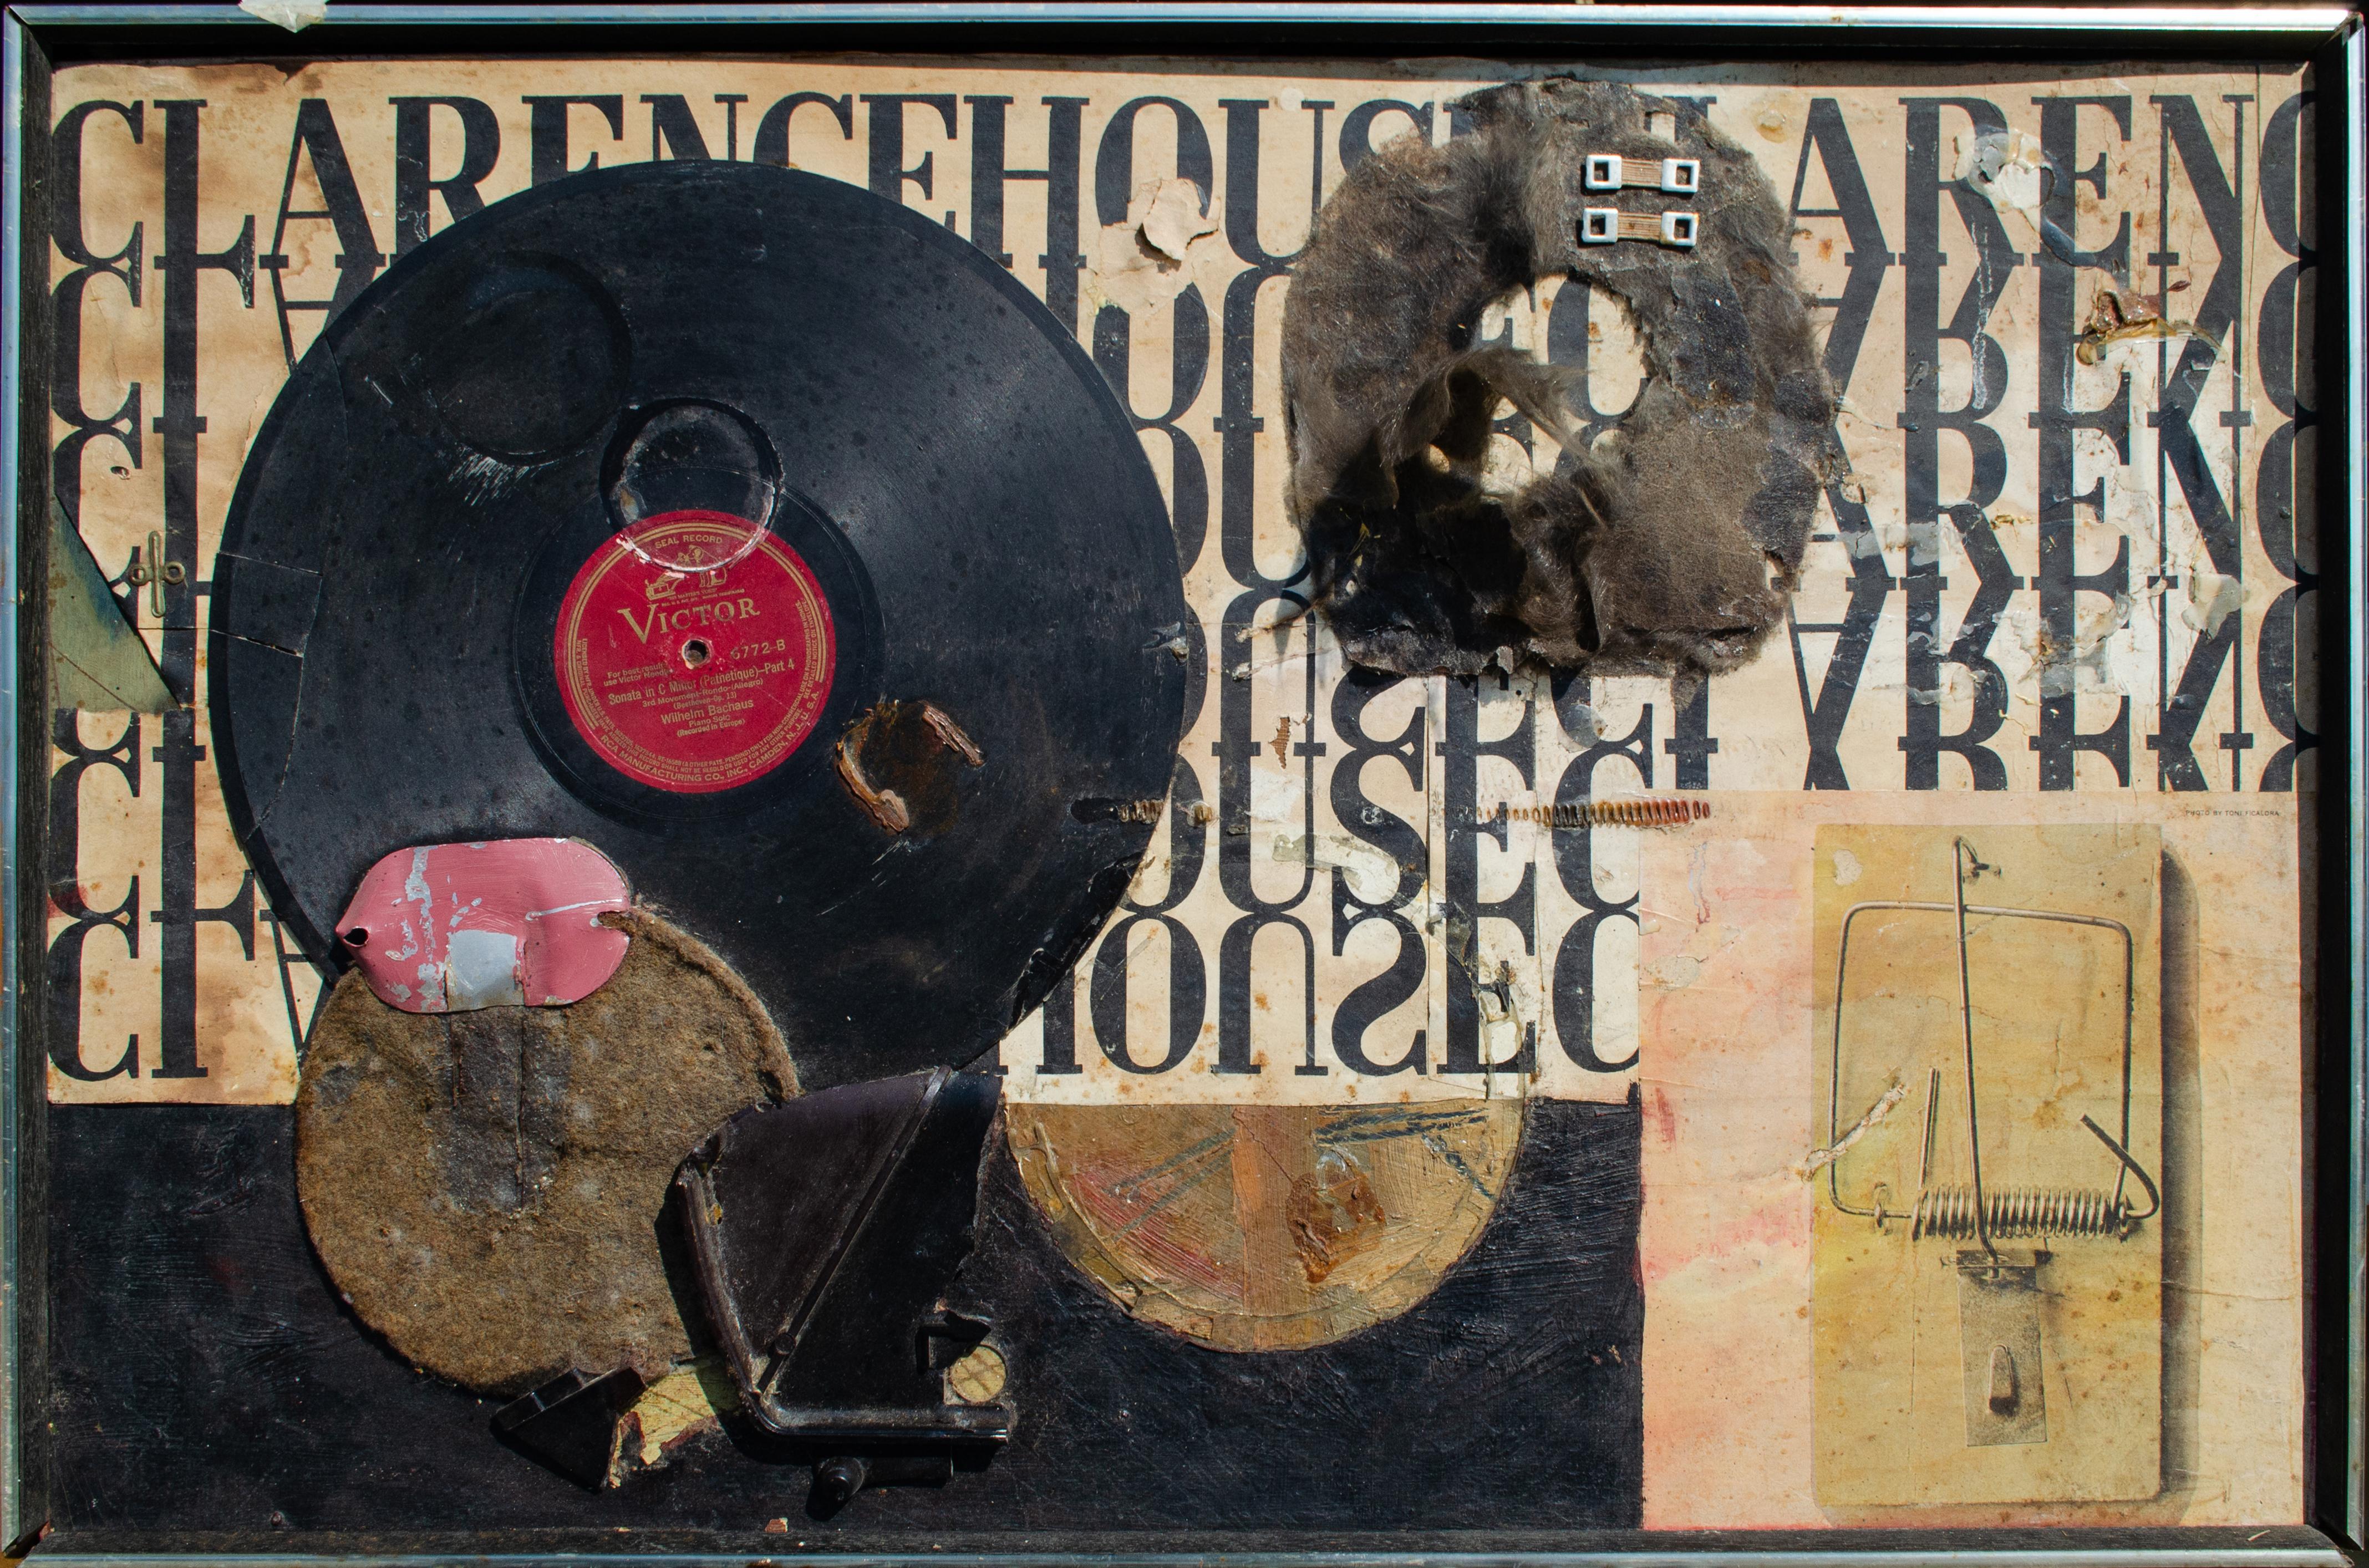 Myrtle Todes (American)
Construction Go, c. 1960-65
Mixed media
19 x 29 3/4 x 1 1/2 in.
Art Institute of Chicago Sixty-Eighth Annual Exhibition by Artists of Chicago and Vicinity, 1965, submission label verso

This edgy punk-rock assemblage was